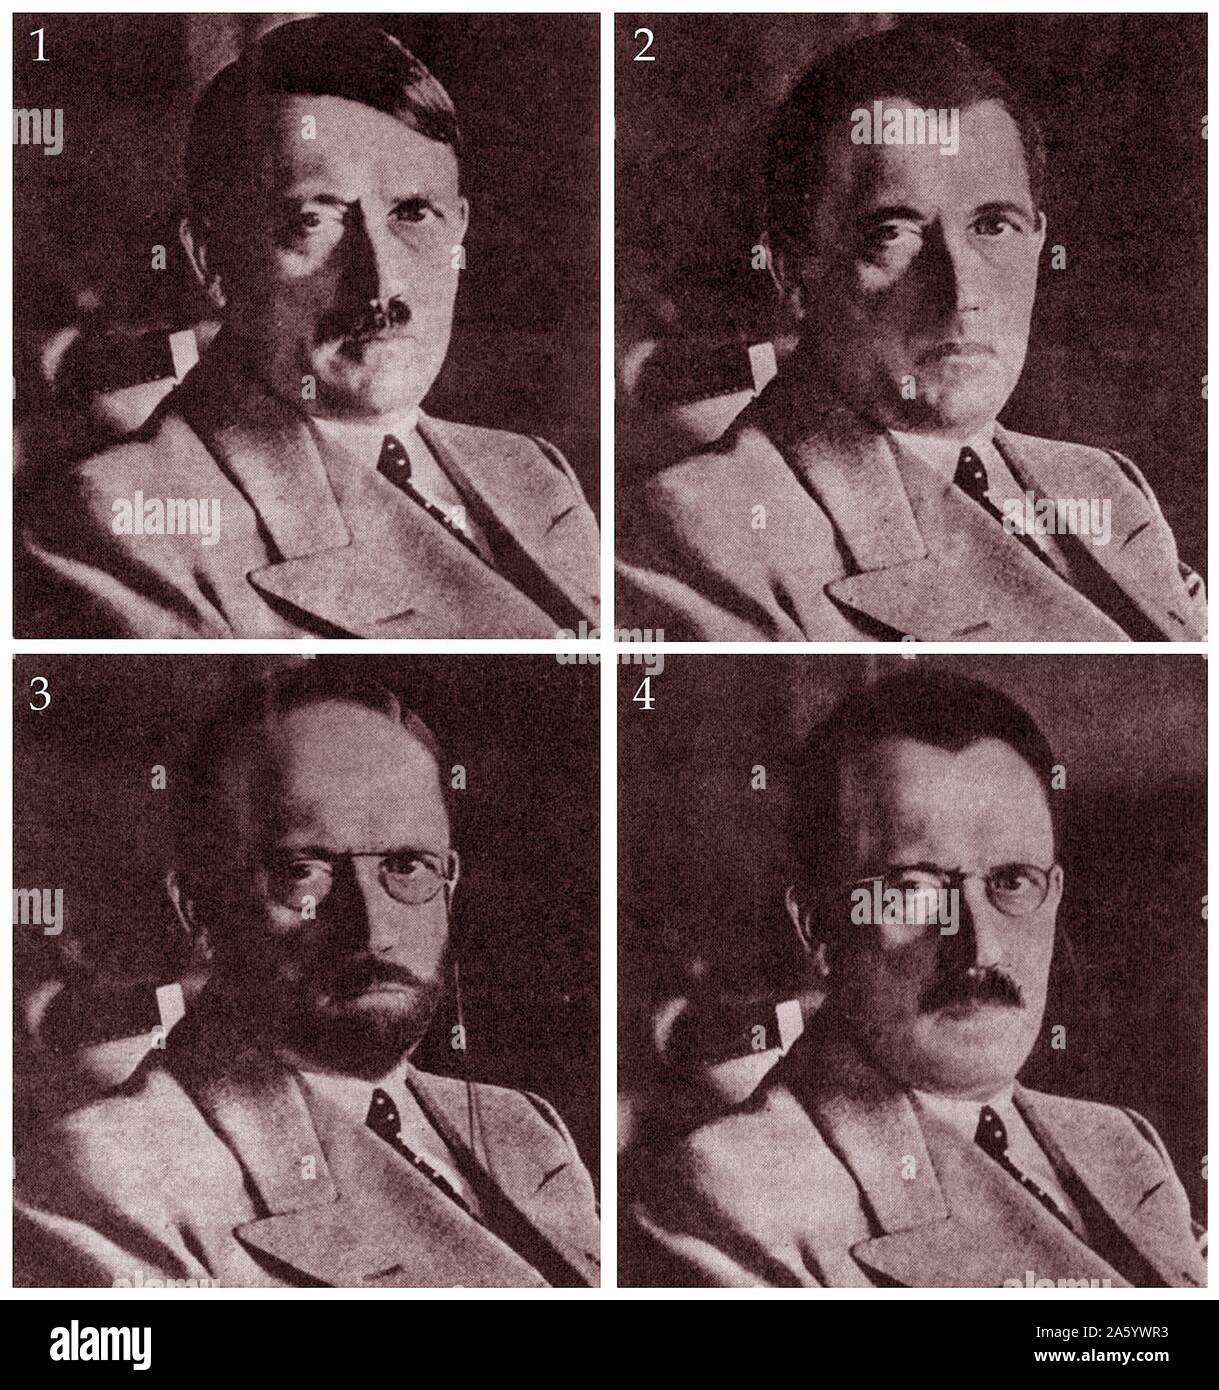 Hitler in disguise. US intelligence images of how Hitler could have disguised himself. Dated 1944 Stock Photo